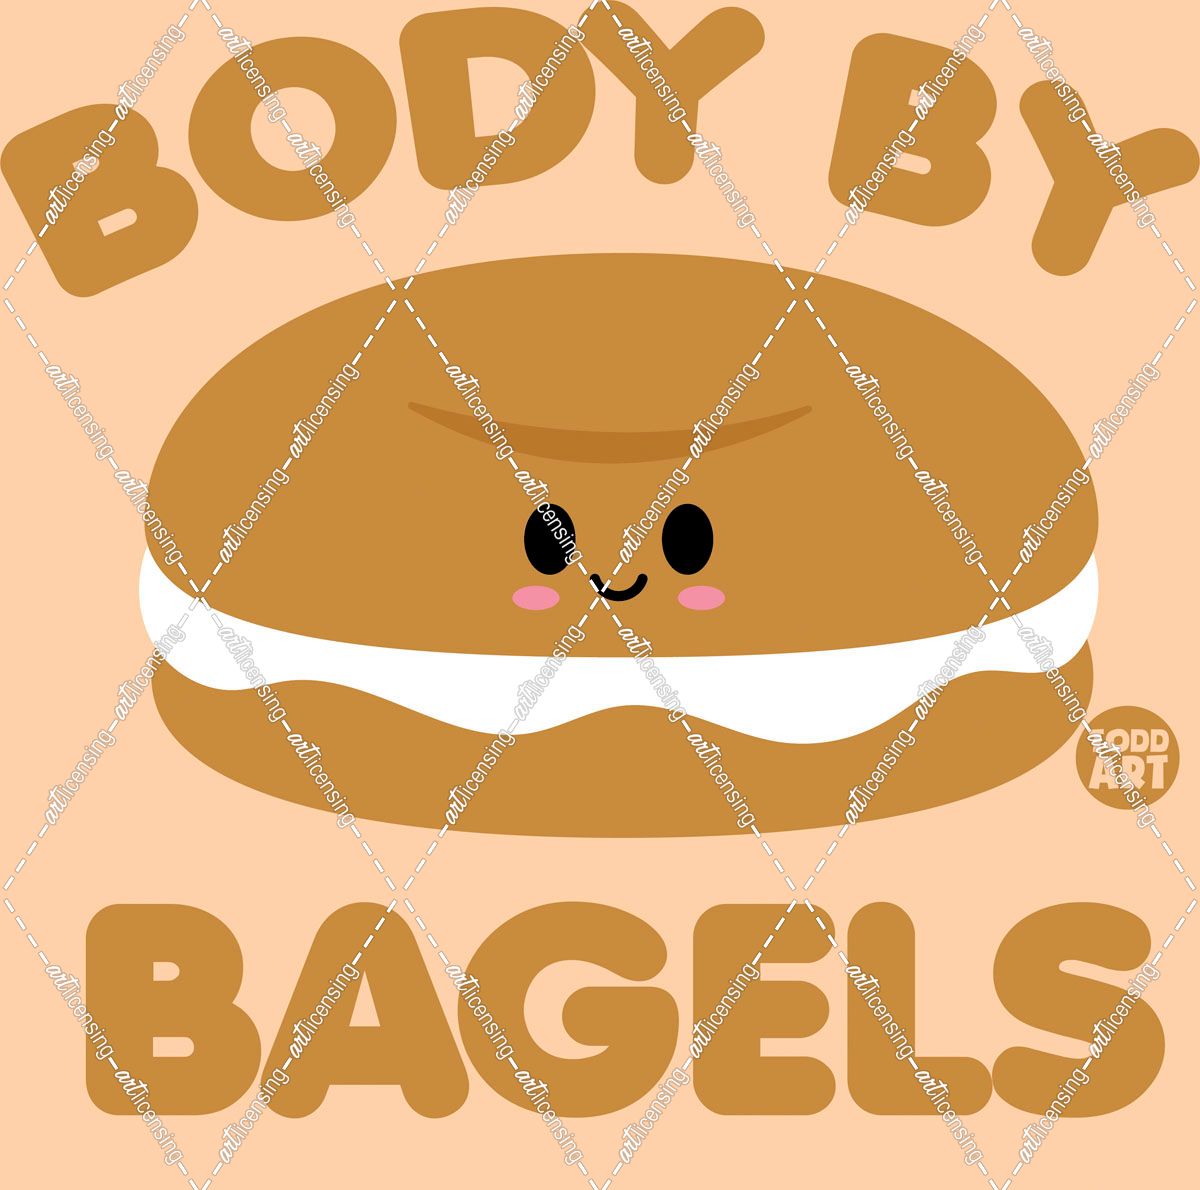 Body By Bagels